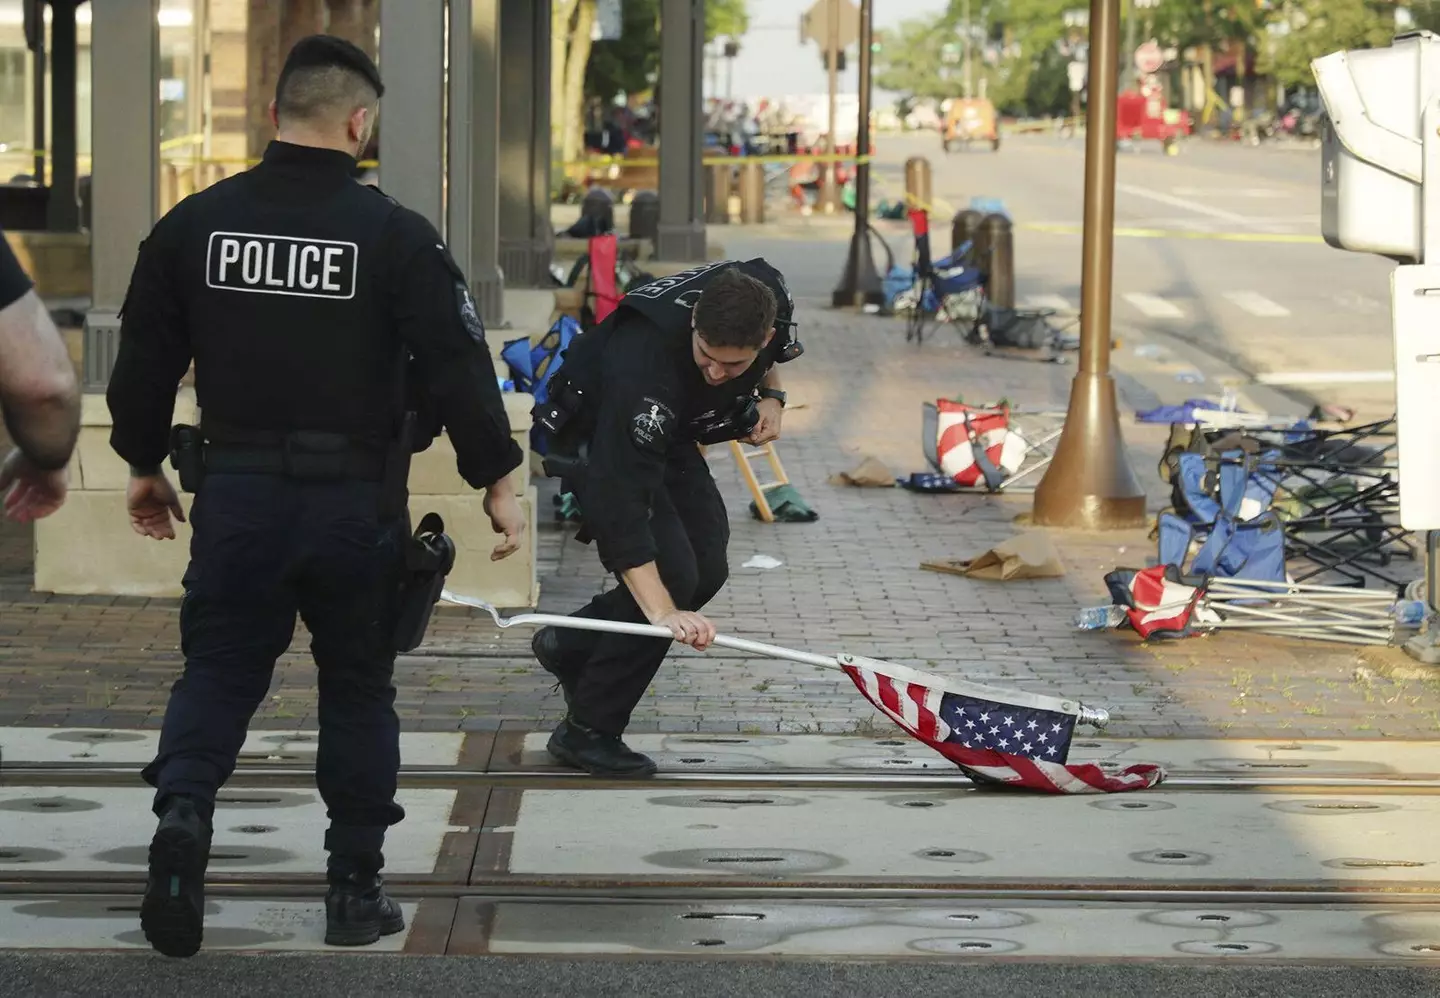 A police officer picks up a flag after Monday's mass shooting in Highland Park.